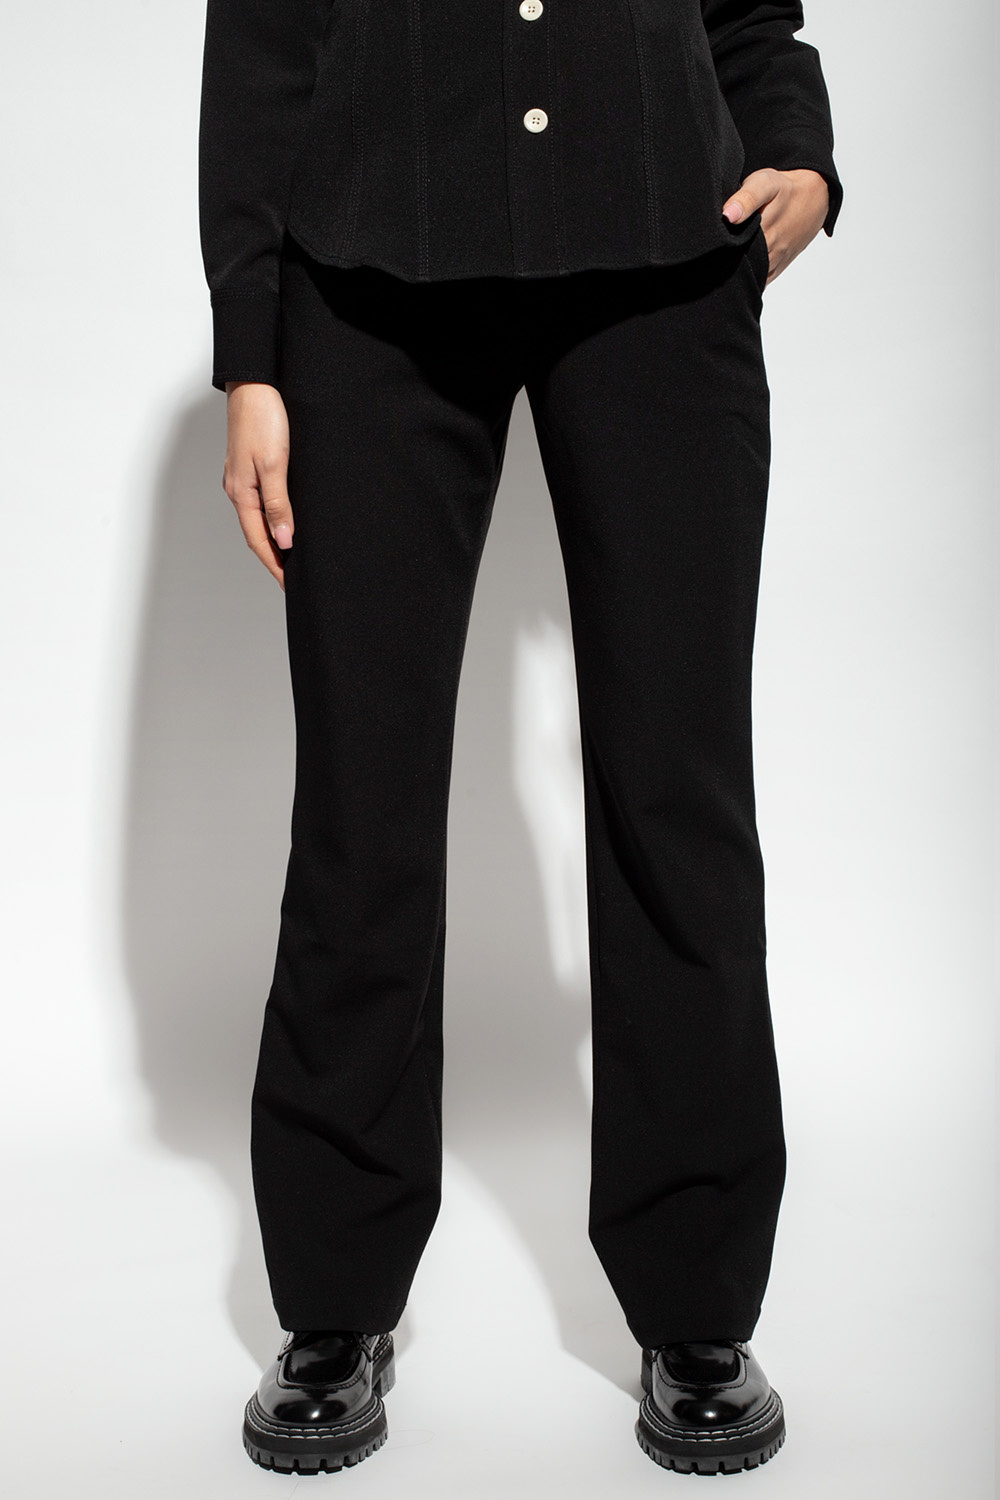 Proenza Schouler White Label trousers rotation with pockets